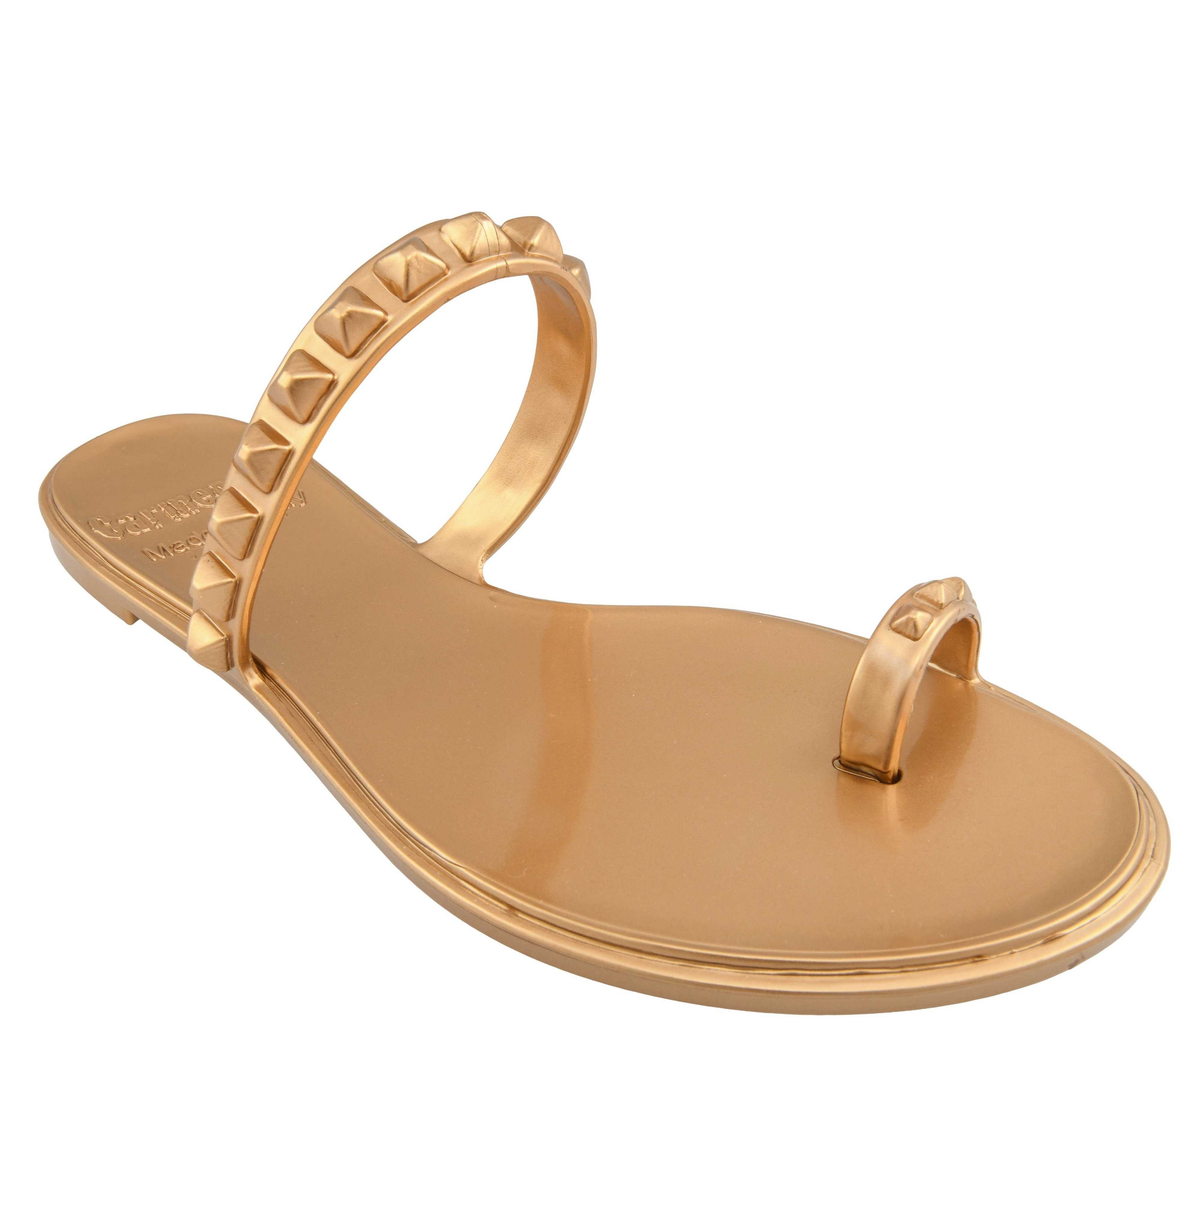 Maria studded jelly sandals women in color gold